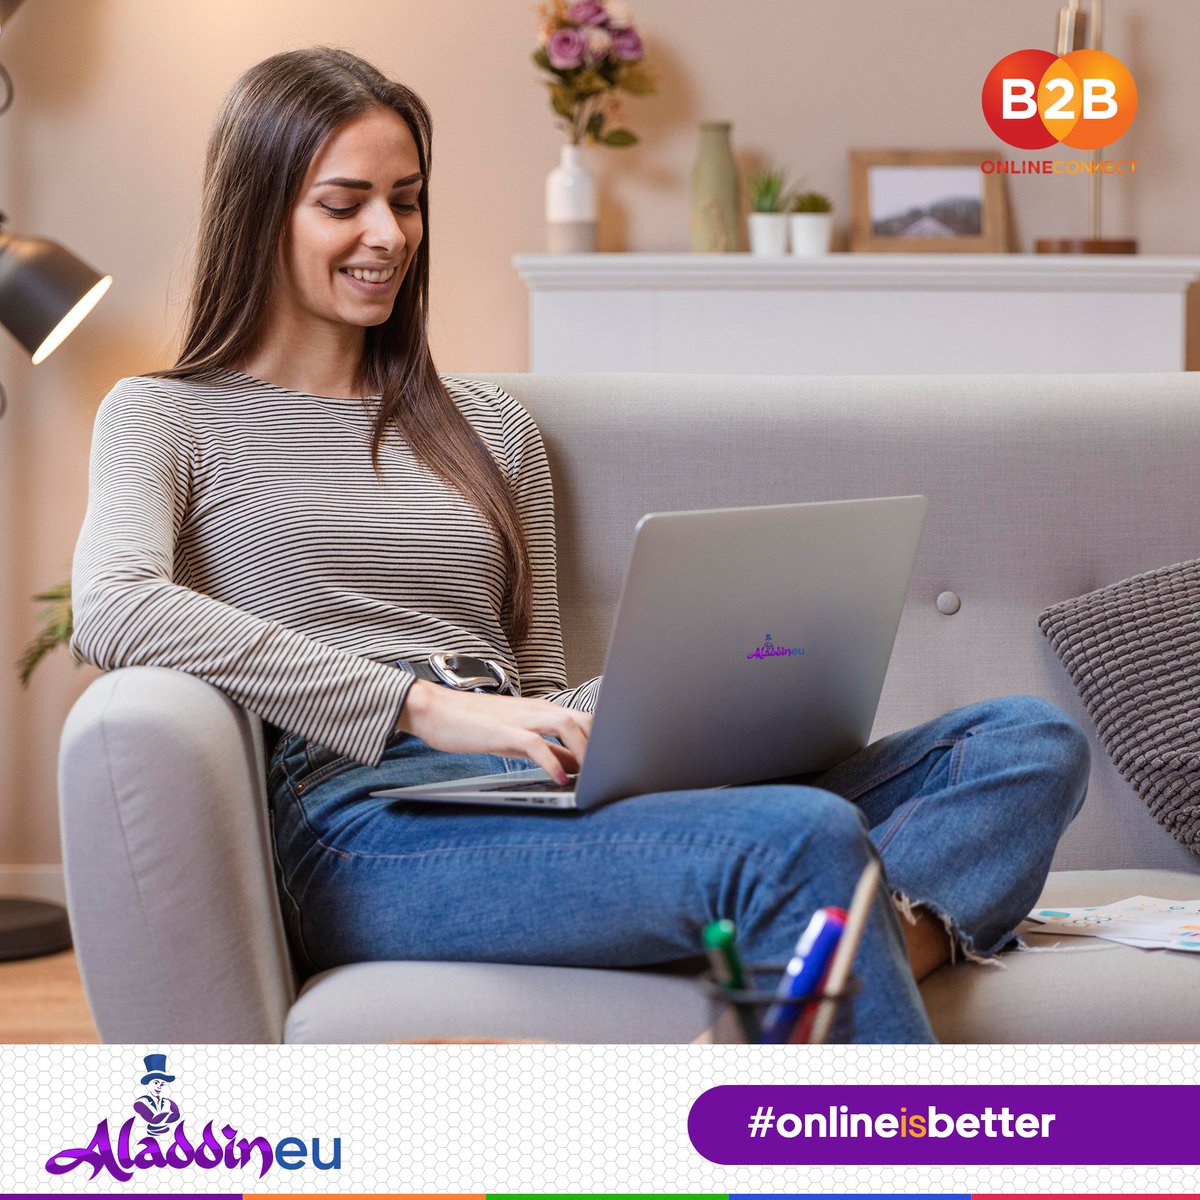 Successful People Never Worry About What Others Are Doing.
-
Shift Your Business Online.
-
👉👉👉aladdineu.com
-
-
#aladdineu #aladdineub2b #purplemagic #b2b #b2bmarketing #b2bplatform #sales #b2bagency #businessexpo #europe #italy